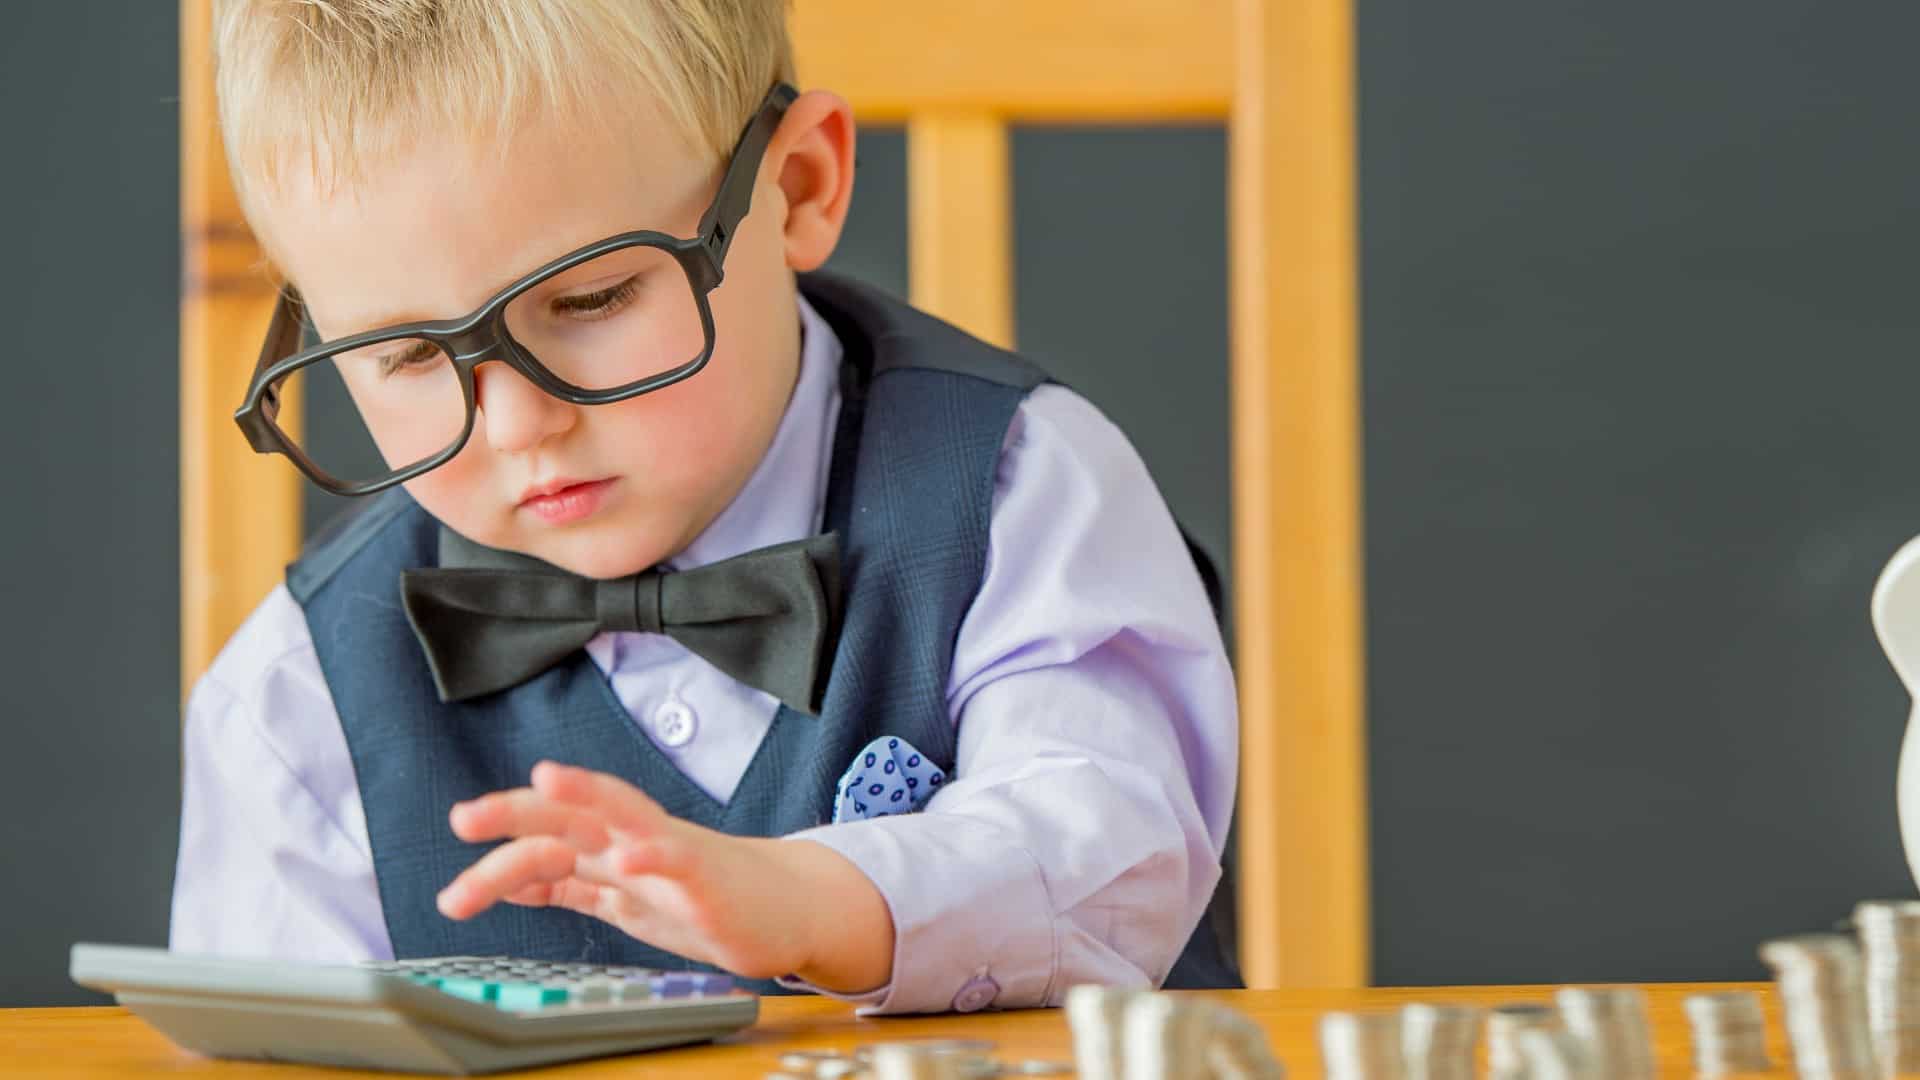 Young boy wearing suit and glasses adds up on calculator with coins on table